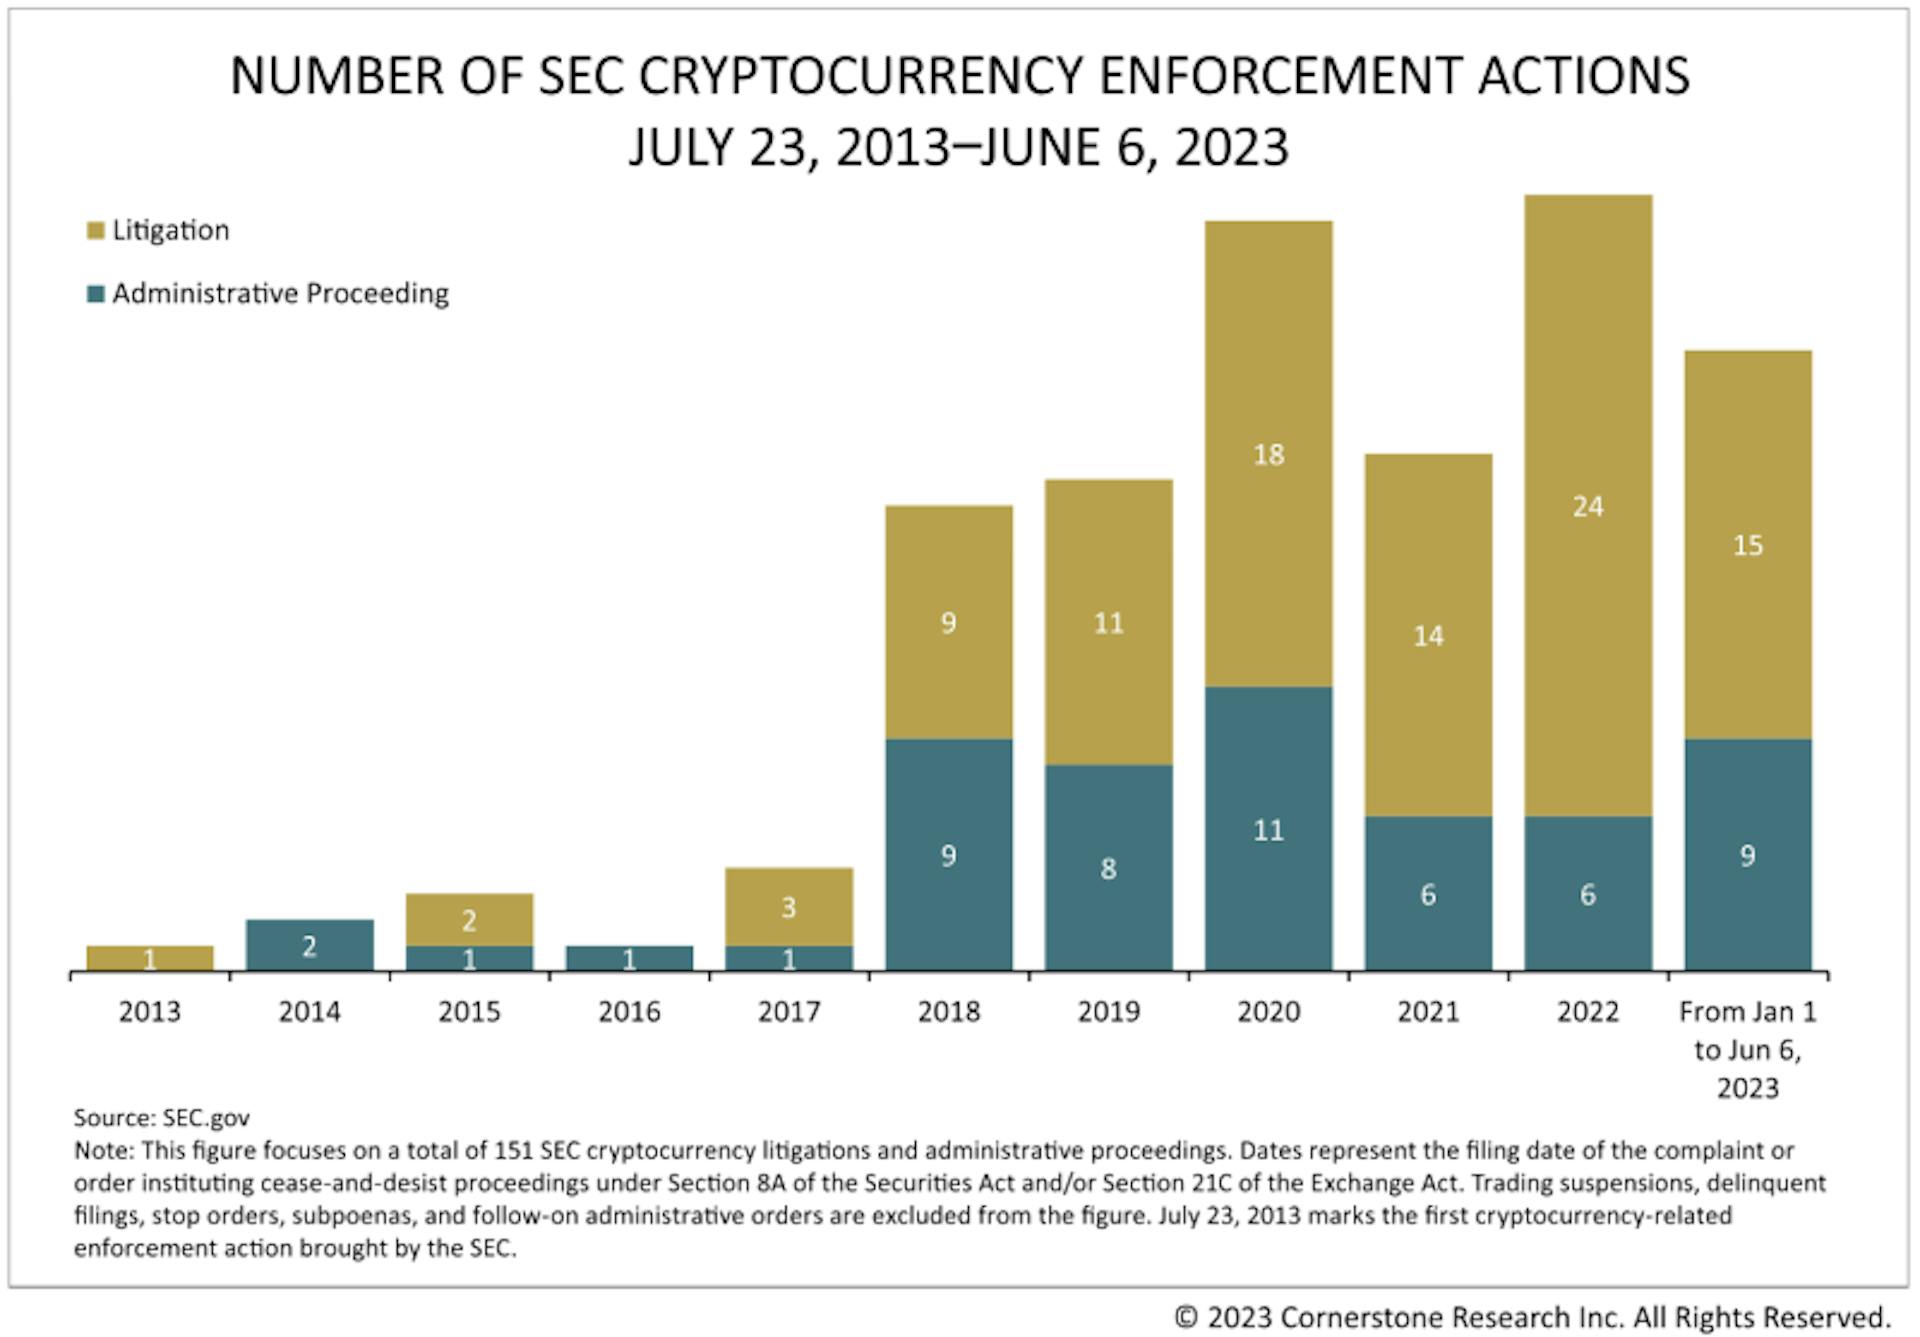 SEC Enforcement Actions in Crypto. Image by SEC and Cornerstone Research